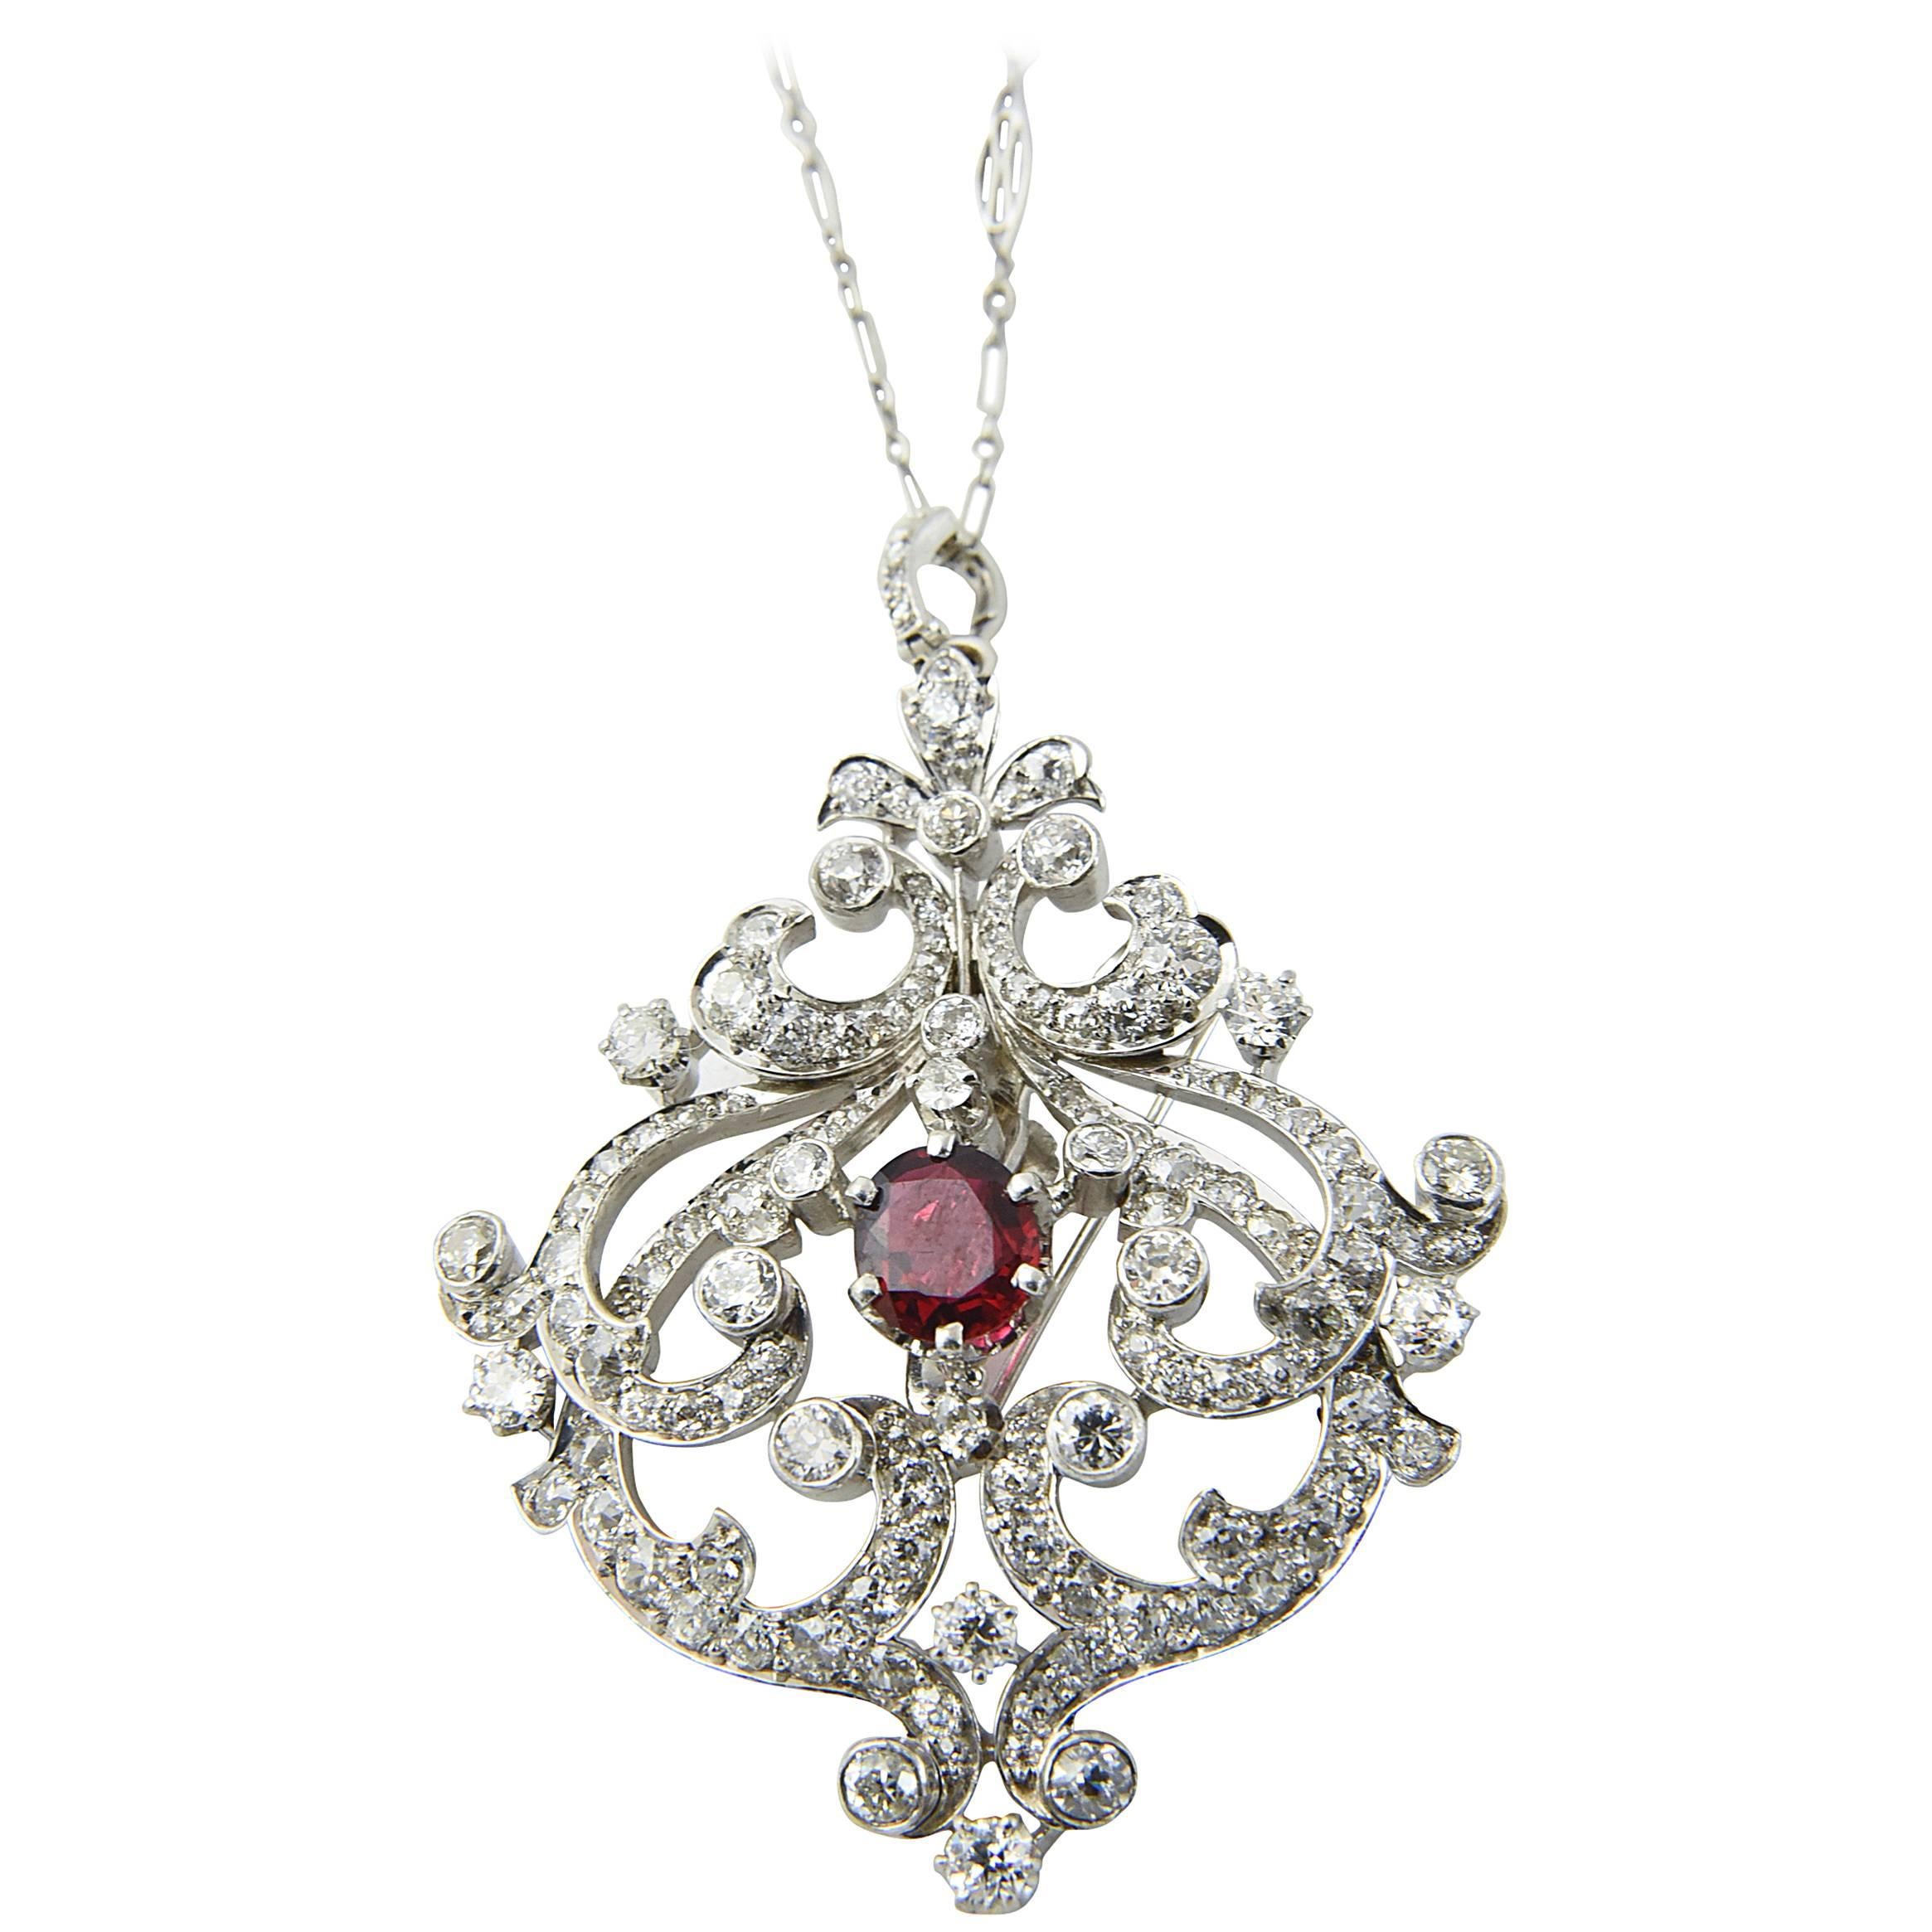 Black Starr and Frost Belle Epoque Spinel Diamond Pendant Brooch